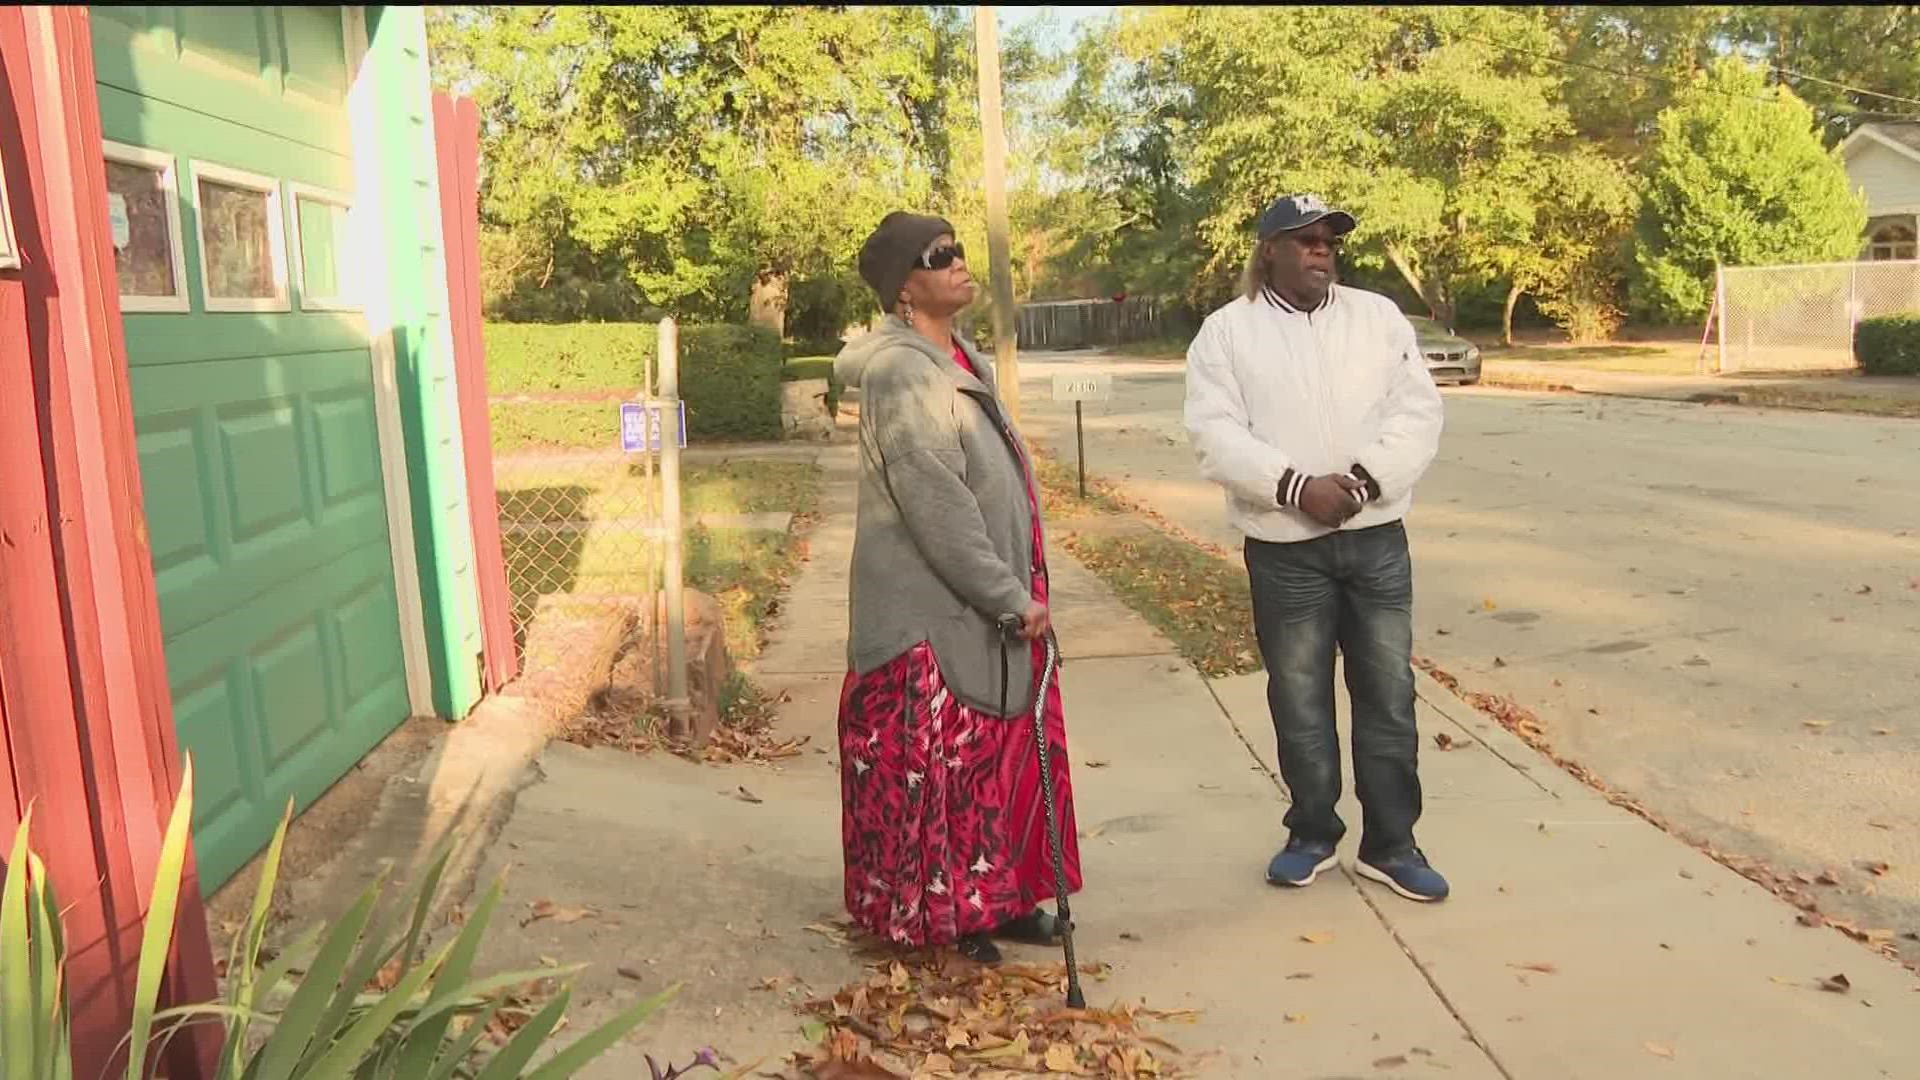 Residents of historic South Atlanta and Lakewood Heights said it's become almost impossible for them to live there.